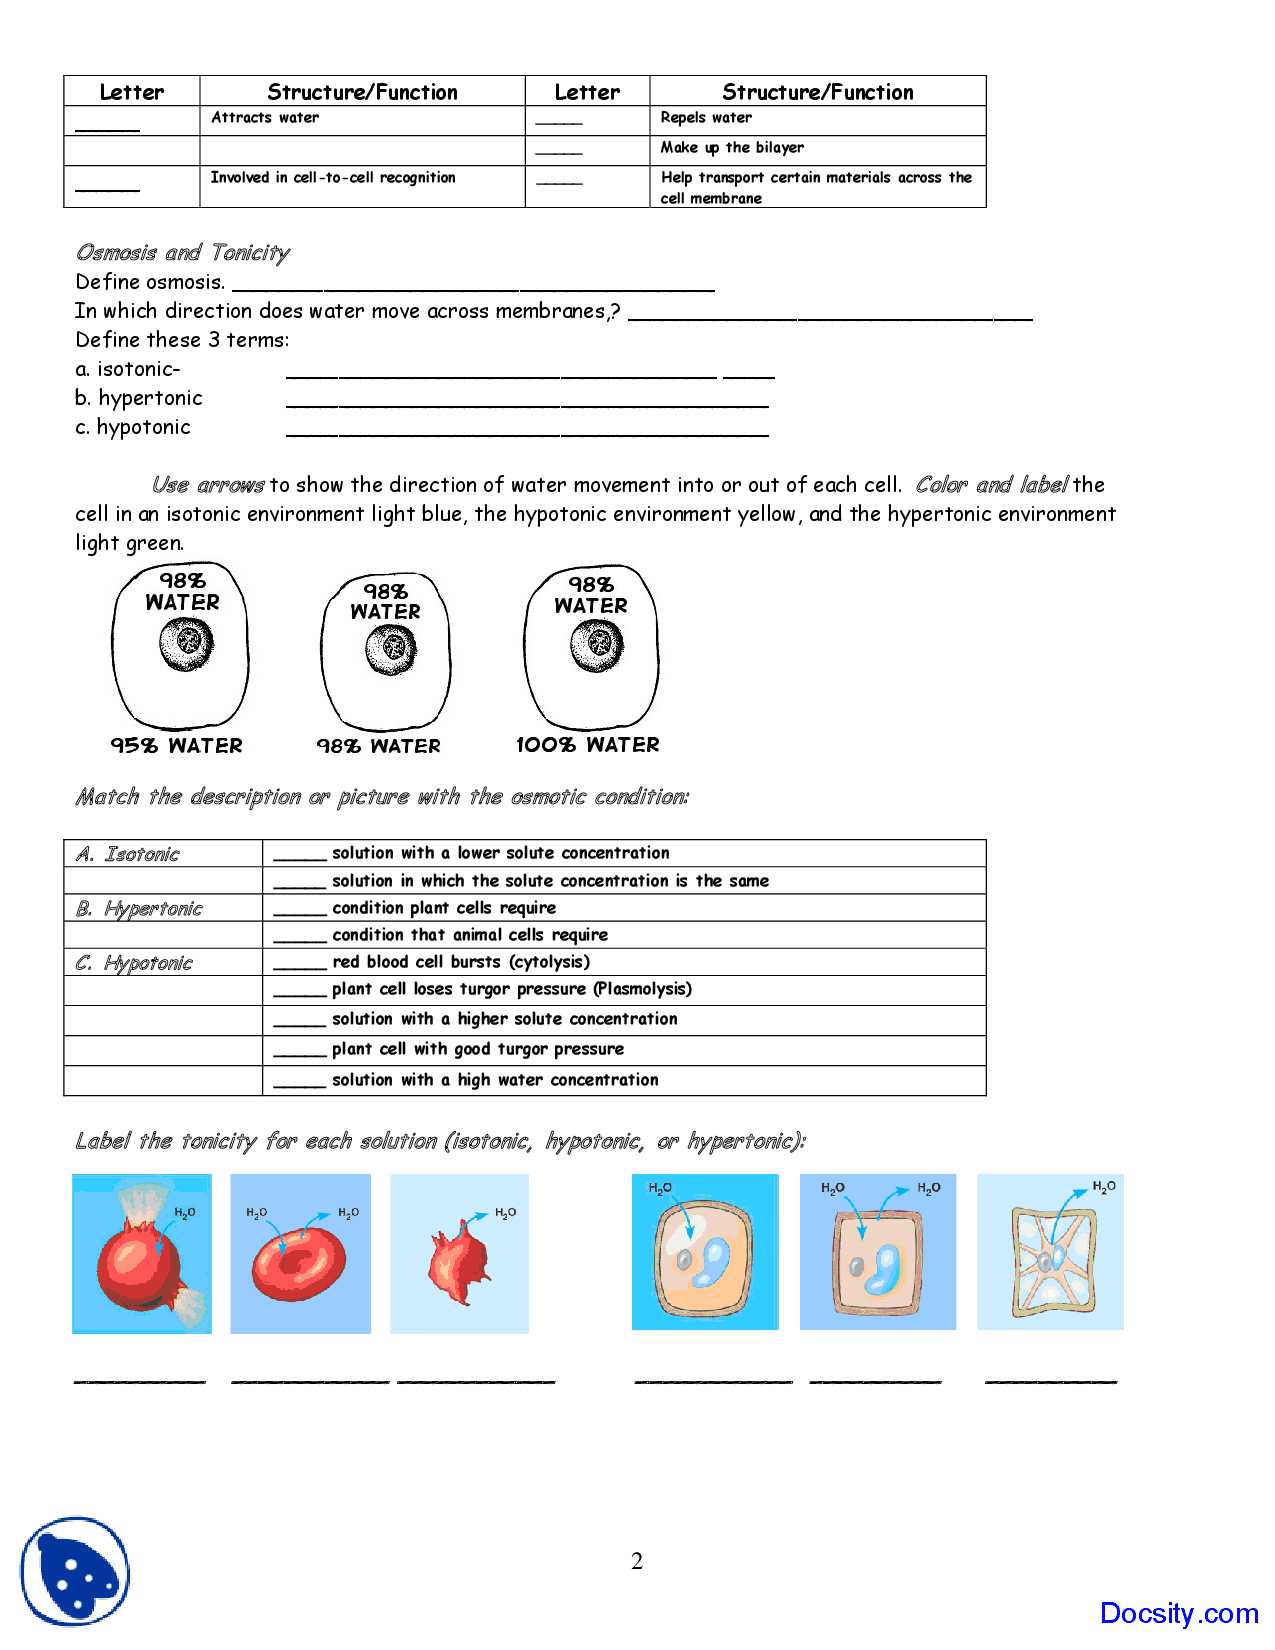 Diffusion and Osmosis Worksheet Answers as Well as Cell Transport Quiz Osmosis Diffusion Membrane Coloring Worksheet